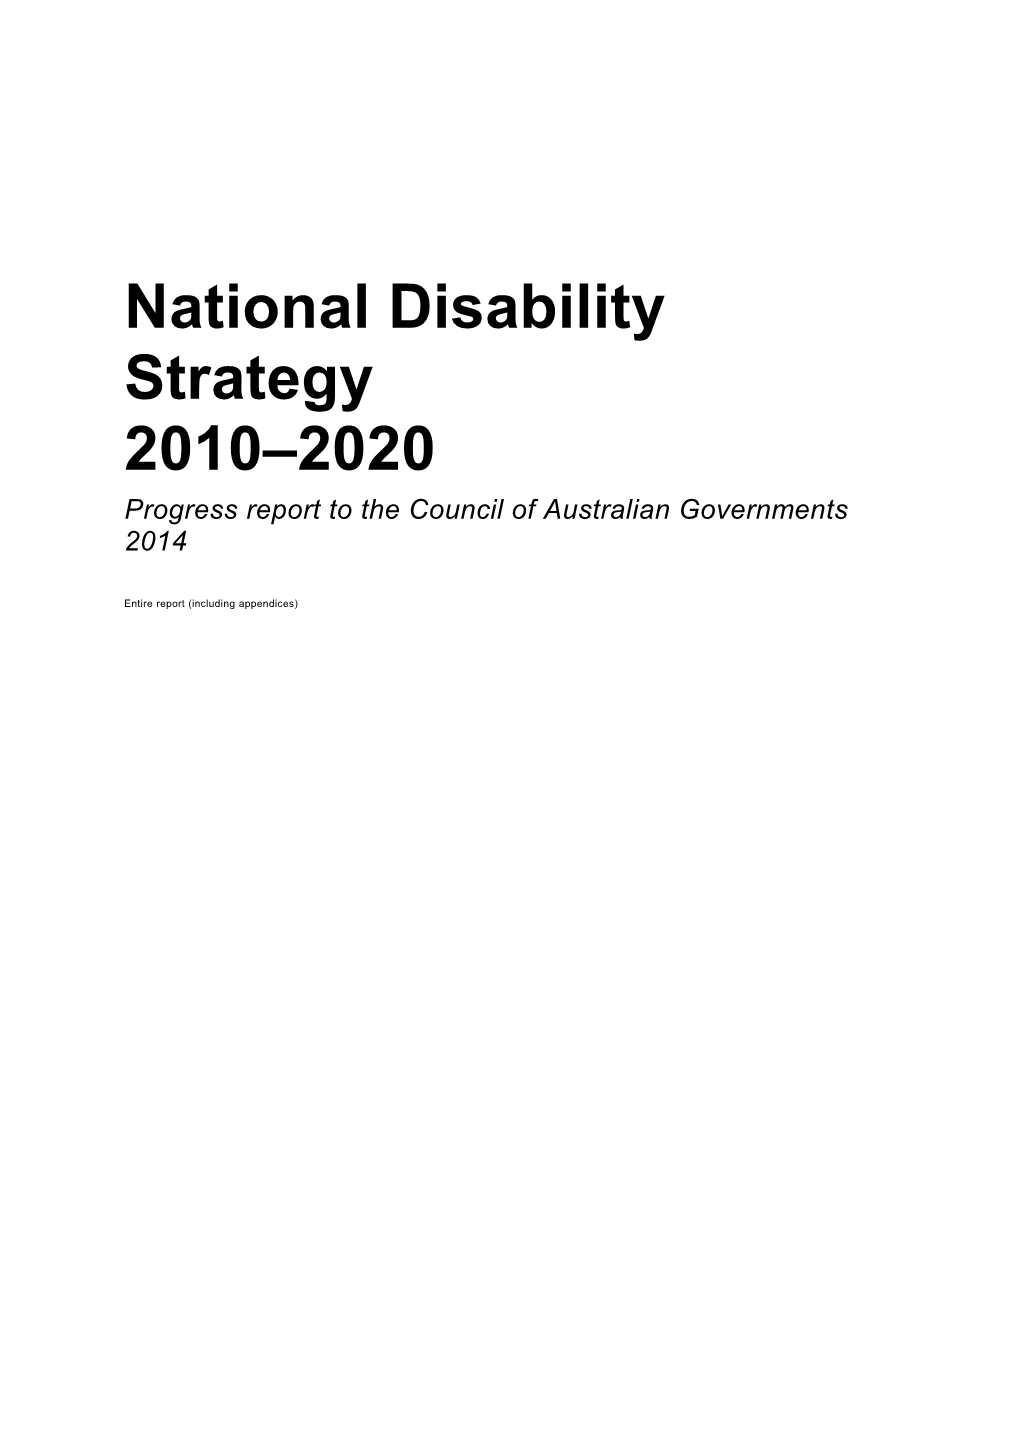 Progress Report to the Council of Australian Governments 2014